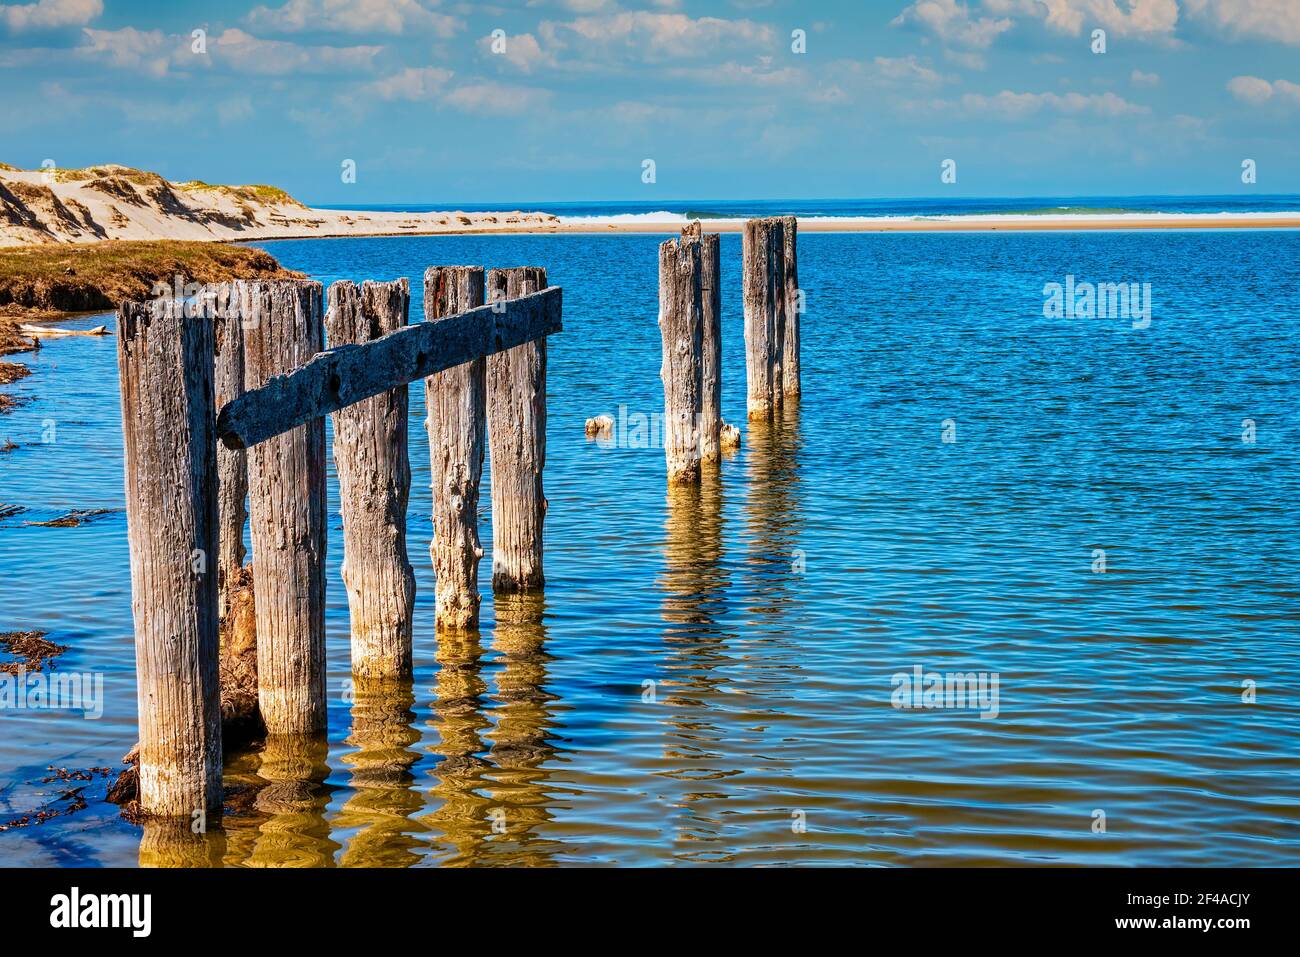 Decaying remains of a wooden pier in blue sea water with sandy beach and open sea beyond. Stock Photo